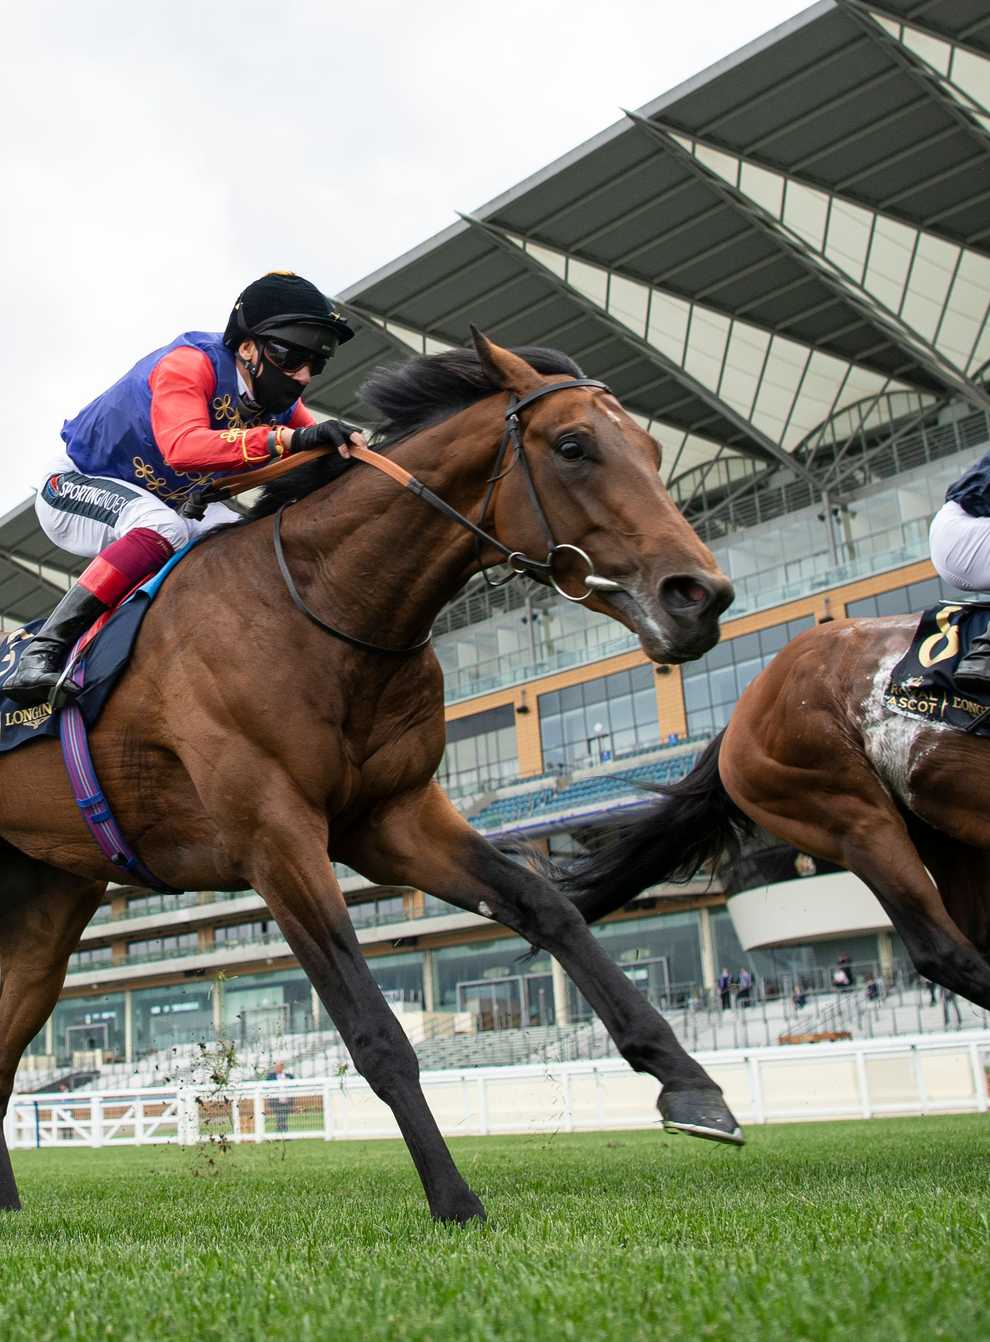 Russian Emperor ridden by Ryan Moore (right) wins the Hampton Court Stakes during day two of Royal Ascot at Ascot Racecourse (Edward Whitaker/PA)